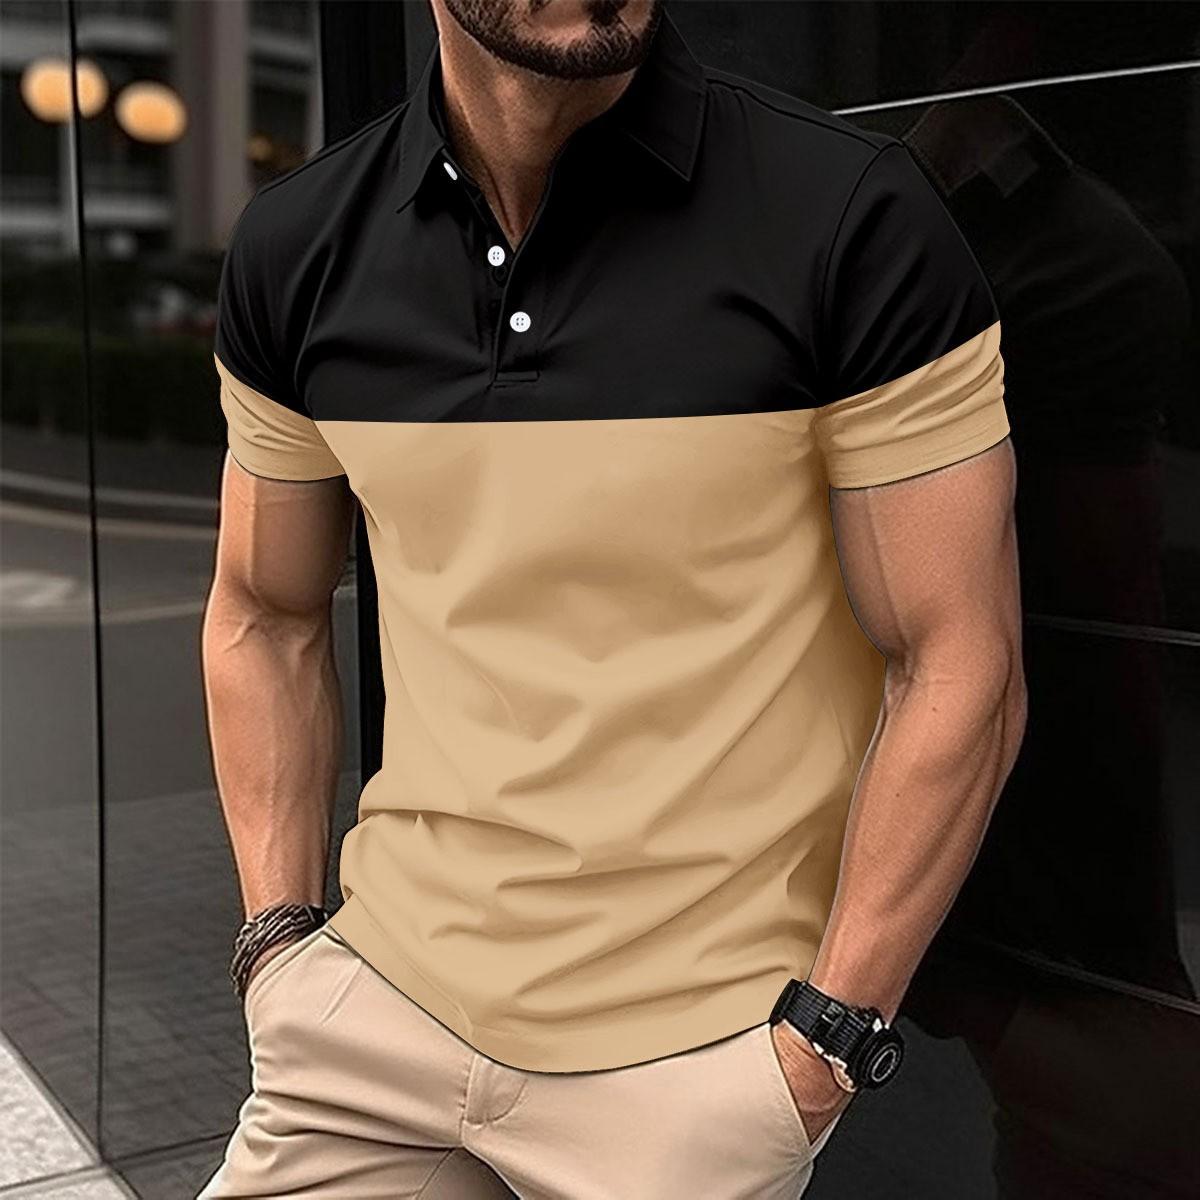 Fashion human New men's casual POLO shirt pockets V-neck buttons business colour blocking matchy-matchy T-shirt tops